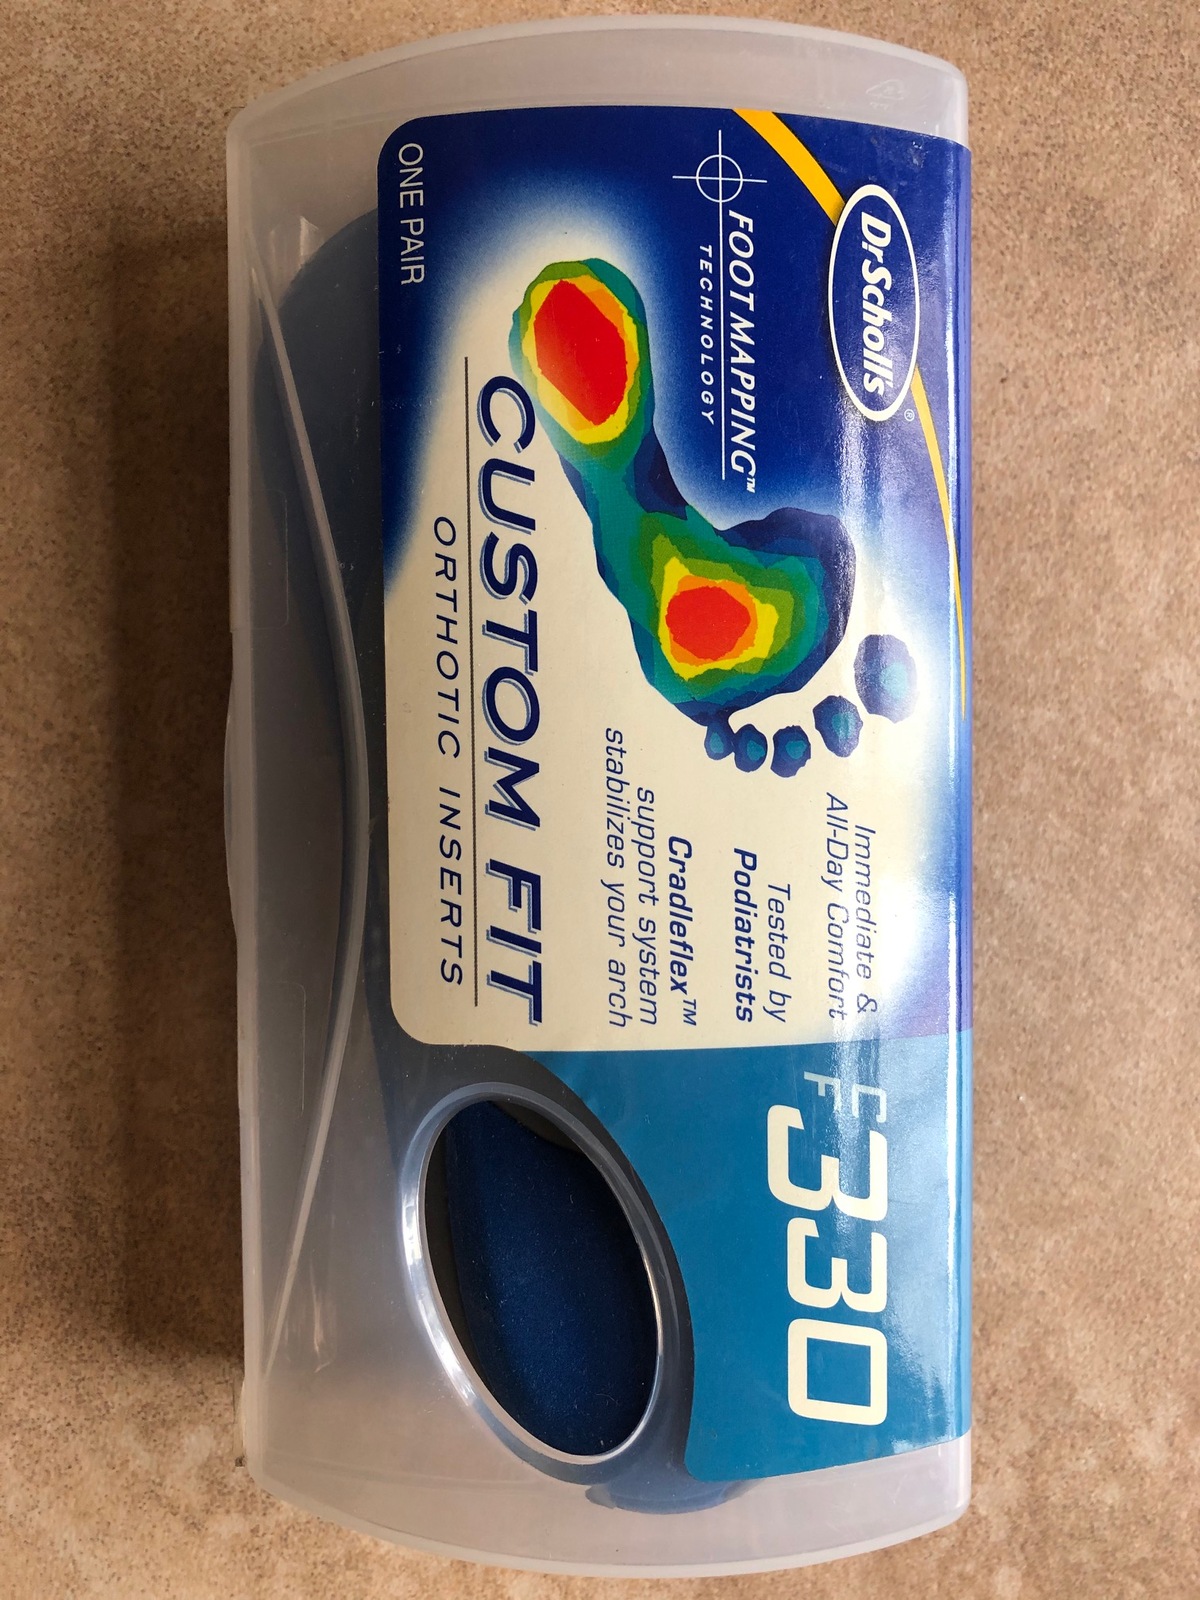 Dr. Scholl's Custom Fit Orthotic Inserts, CF 330 - $45.00